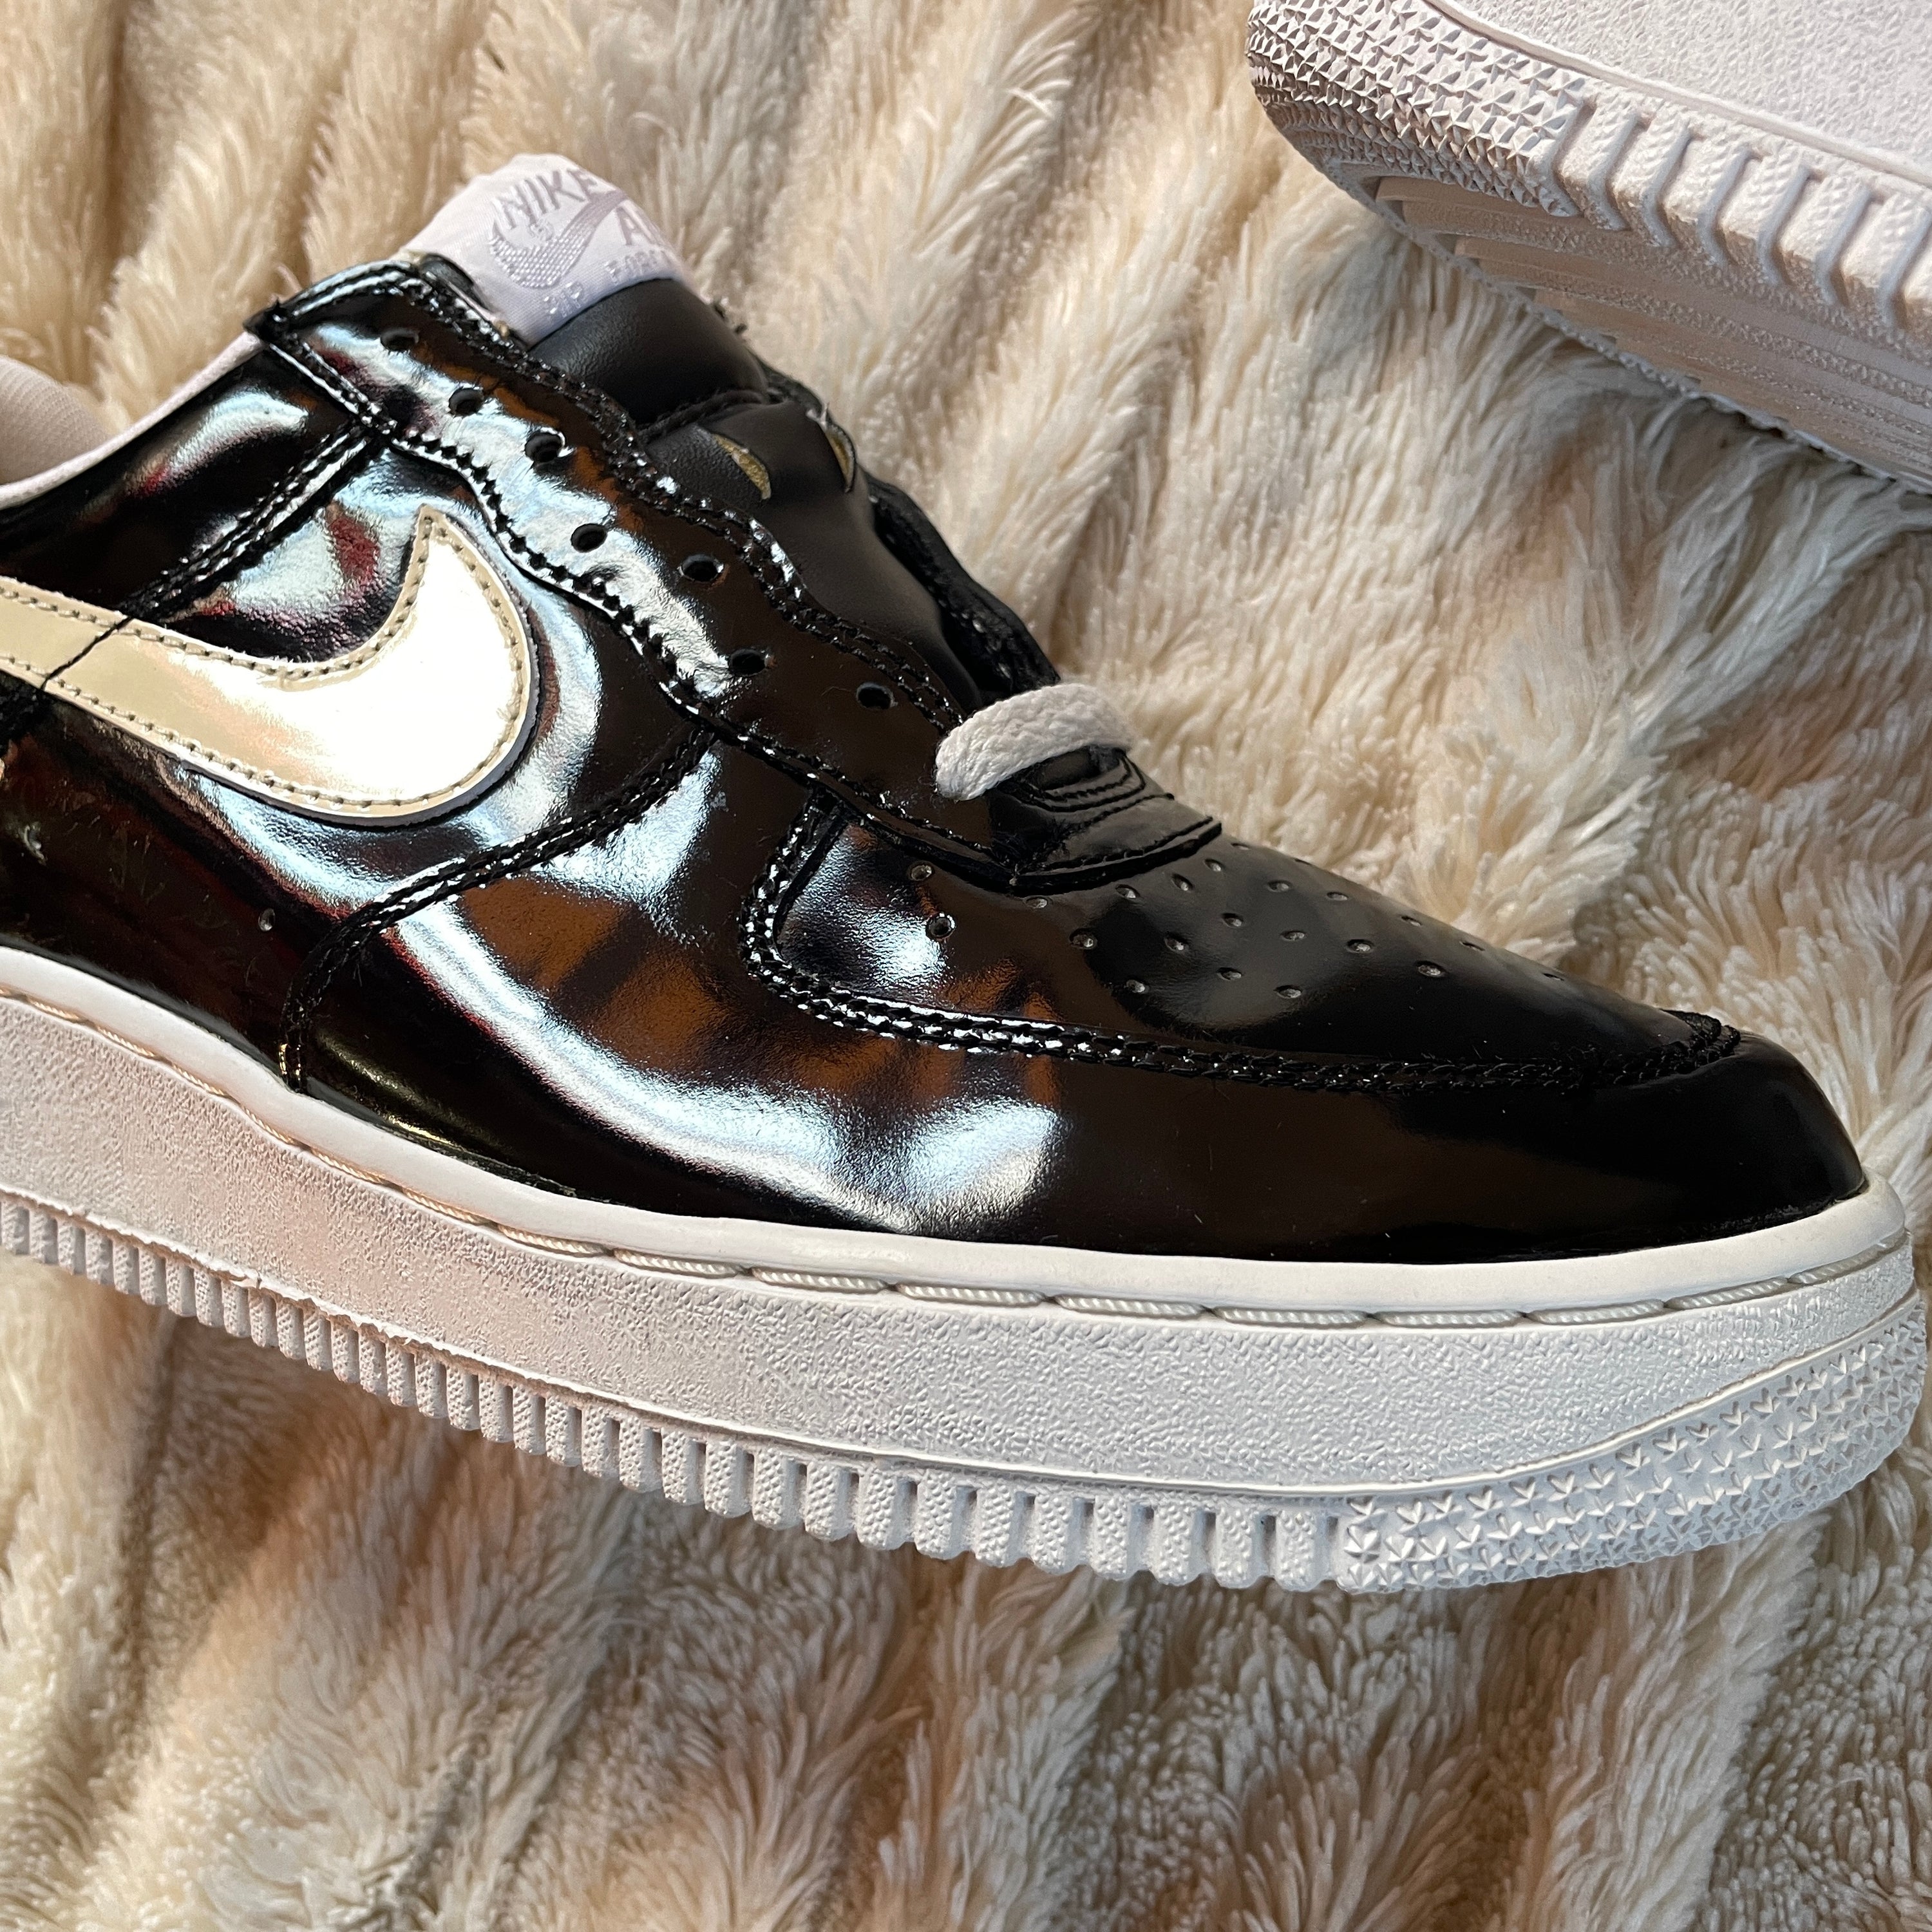 US 8 - NIKE AIR FORCE 1 SC "BLACK PATENT LEATHER" [1996]